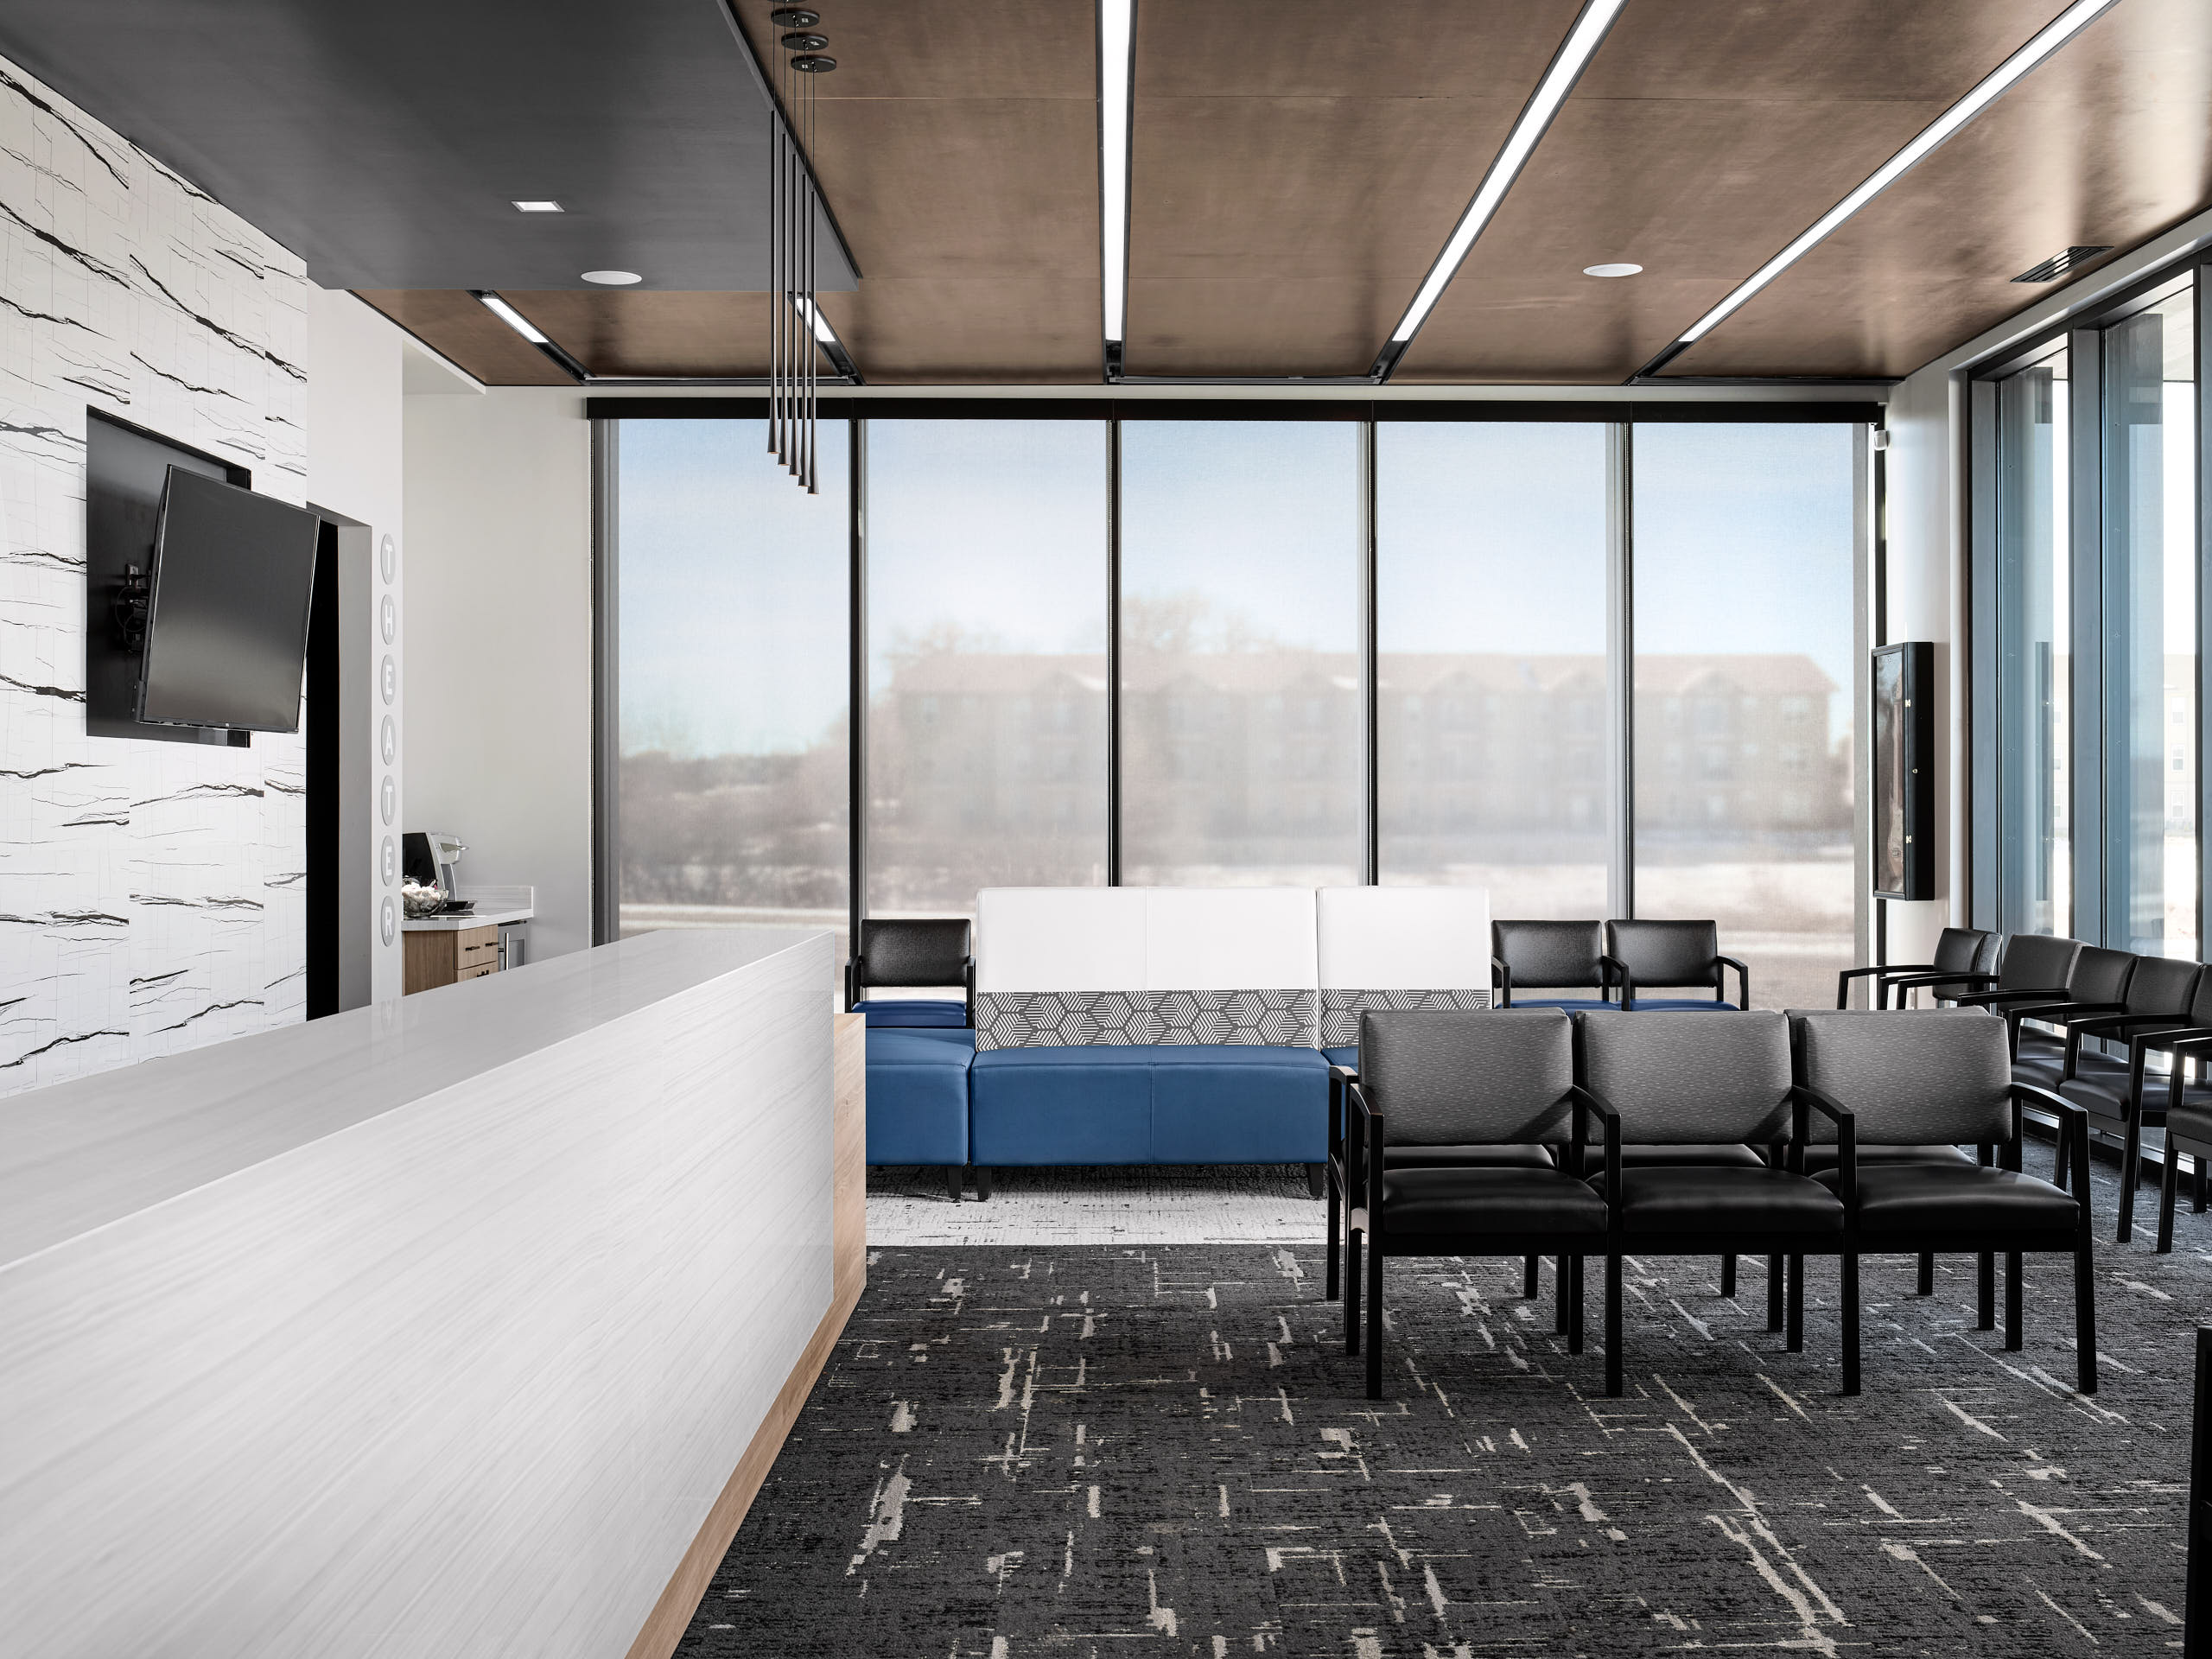 Commercial interior photography by Warren Diggles. 1 point perspective of Richter Orthodontics reception area and waiting room. Project by Design Ergonomics, VFLA Architects, and Elder Construction.